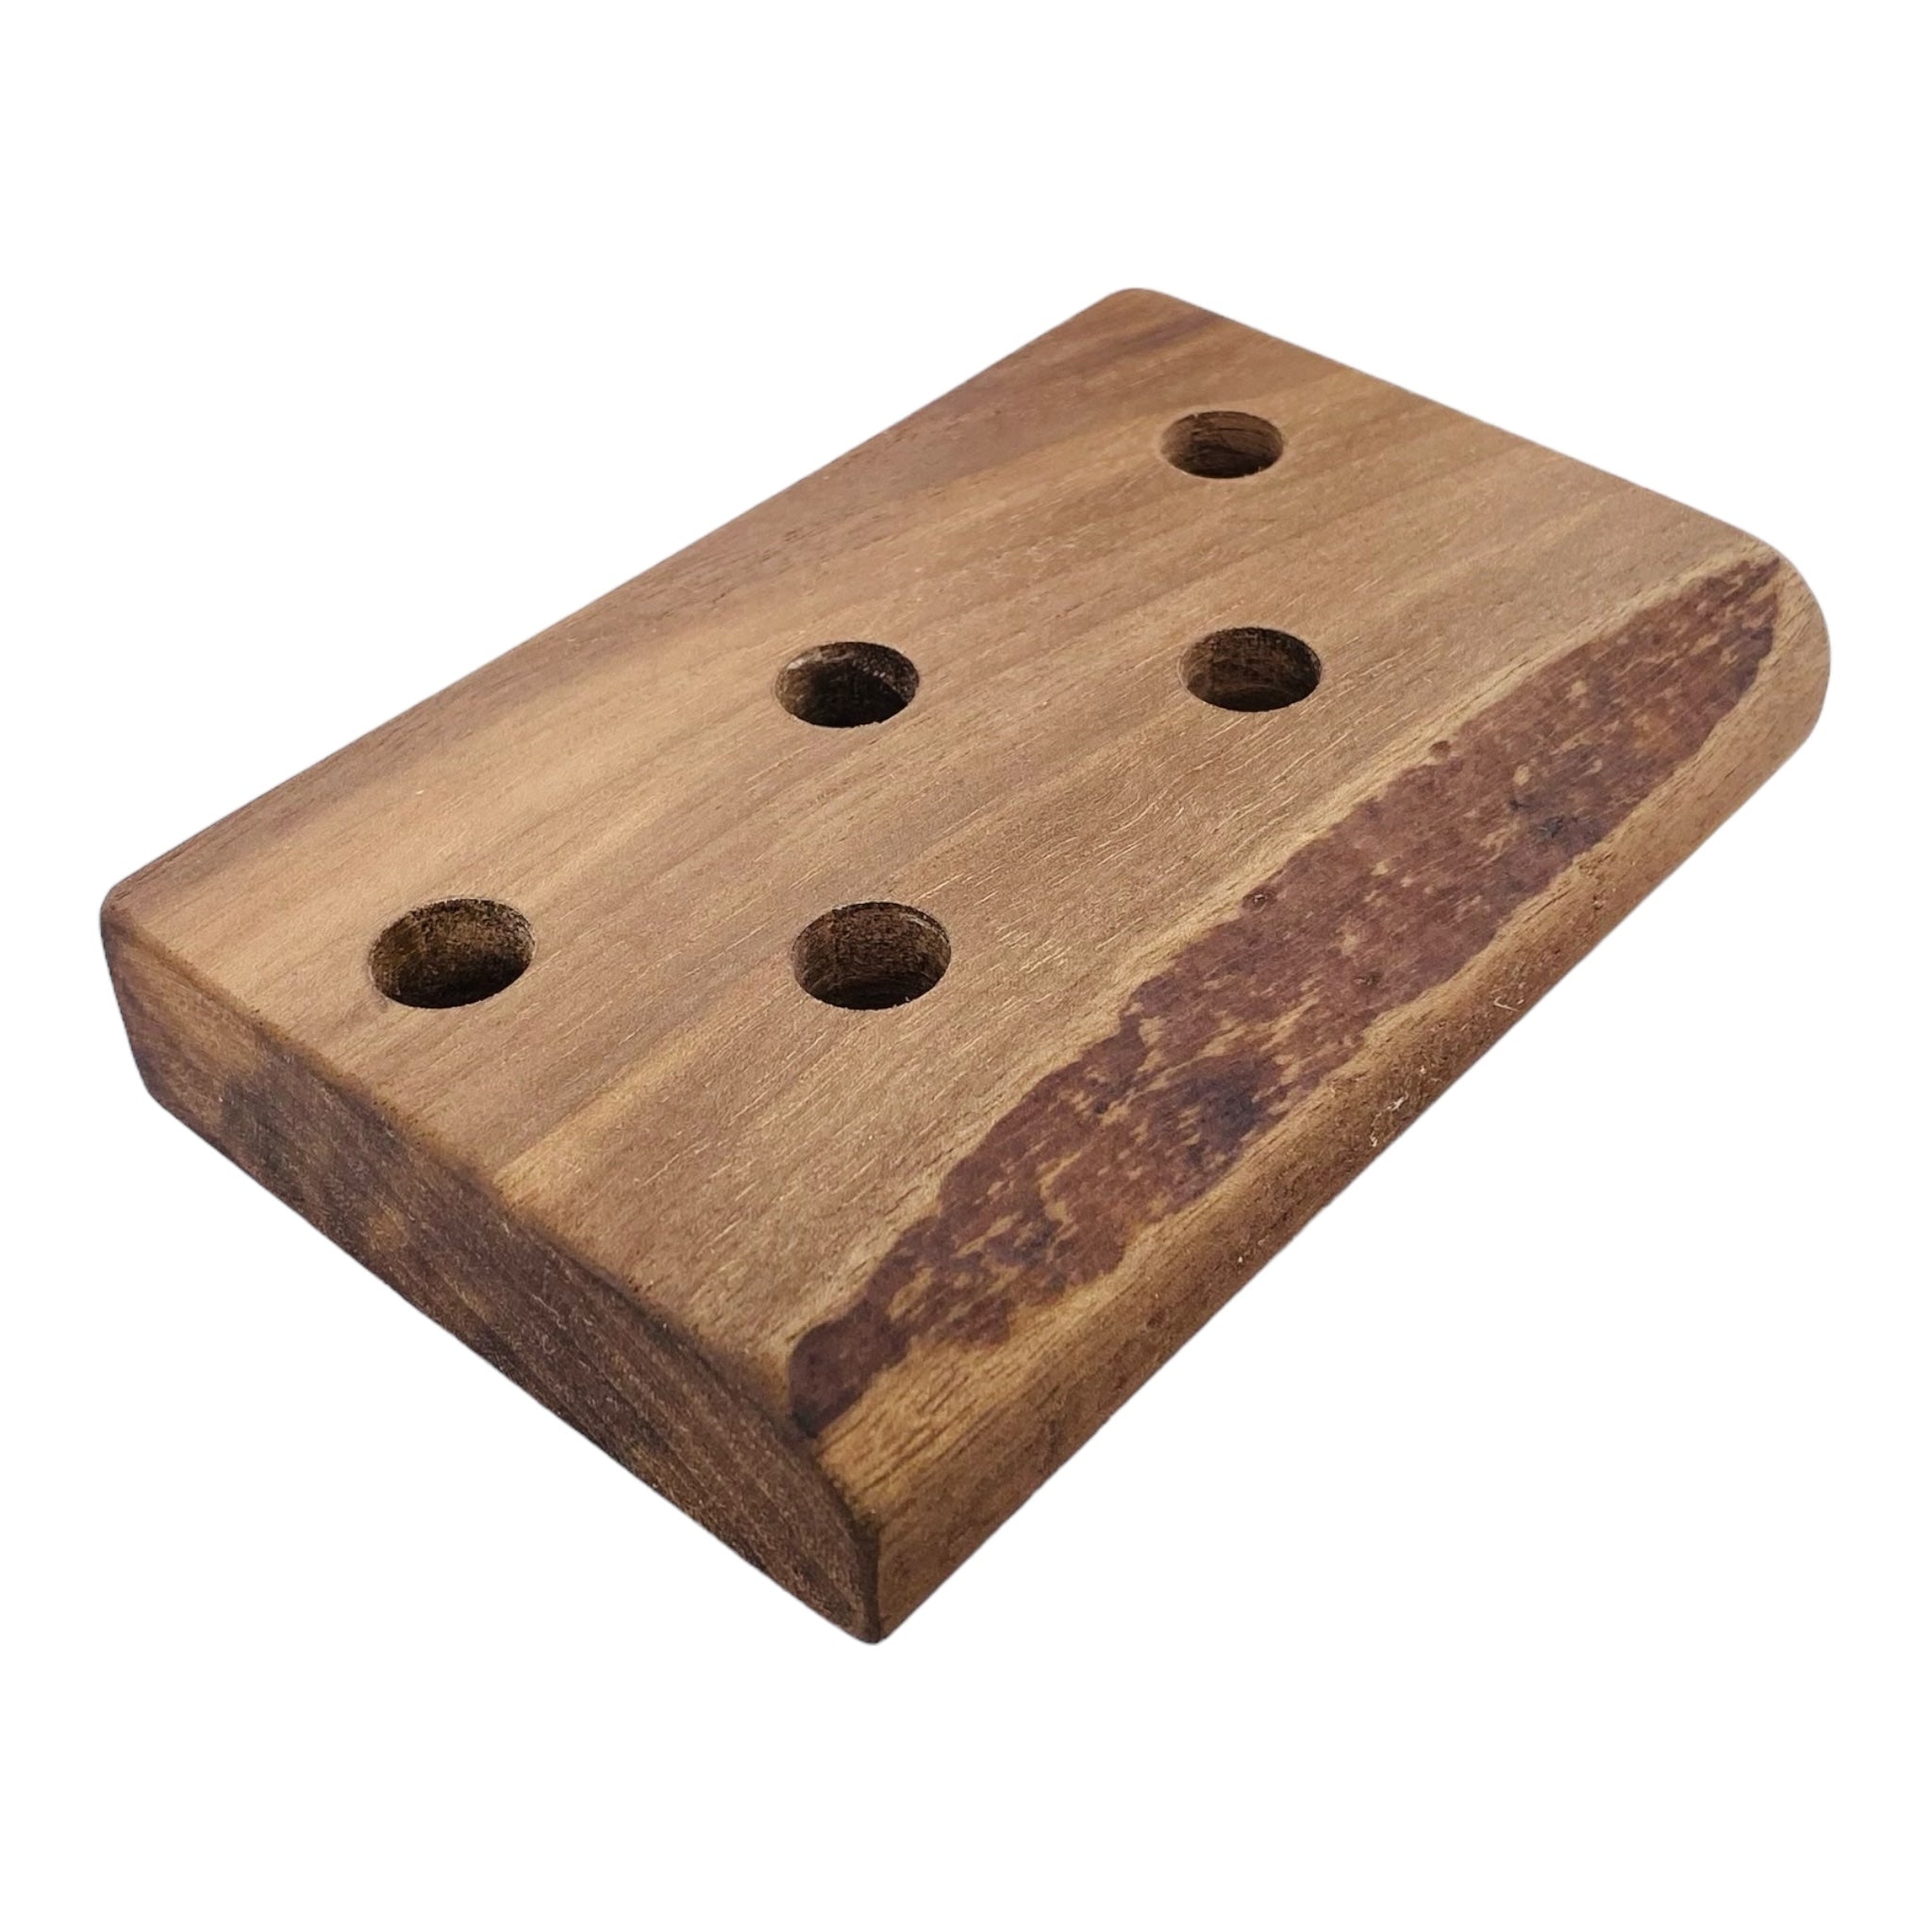 5 Hole Wood Display Stand Holder For 14mm Bong Bowl Pieces Or Quartz Bangers - Black Walnut